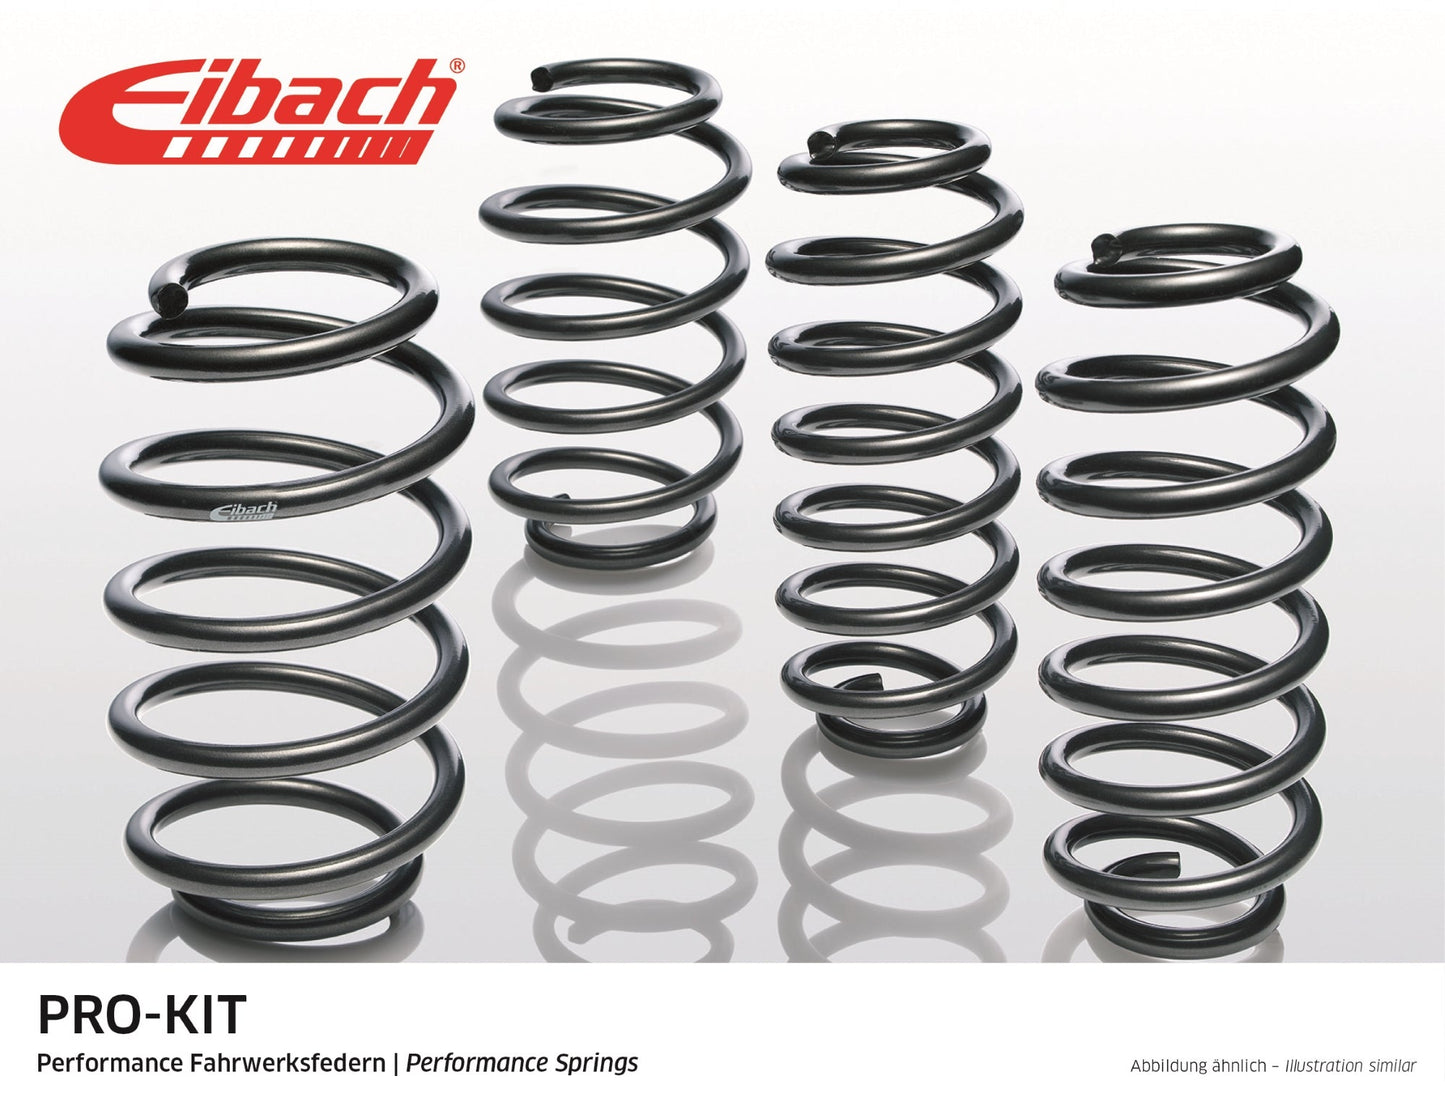 TOYOTA COROLLA COMPACT  1.4, 1.5, 1.6, 1.8, 1.9 D, 2.0, 2.0 D4-D  30 mm  Lowering Springs